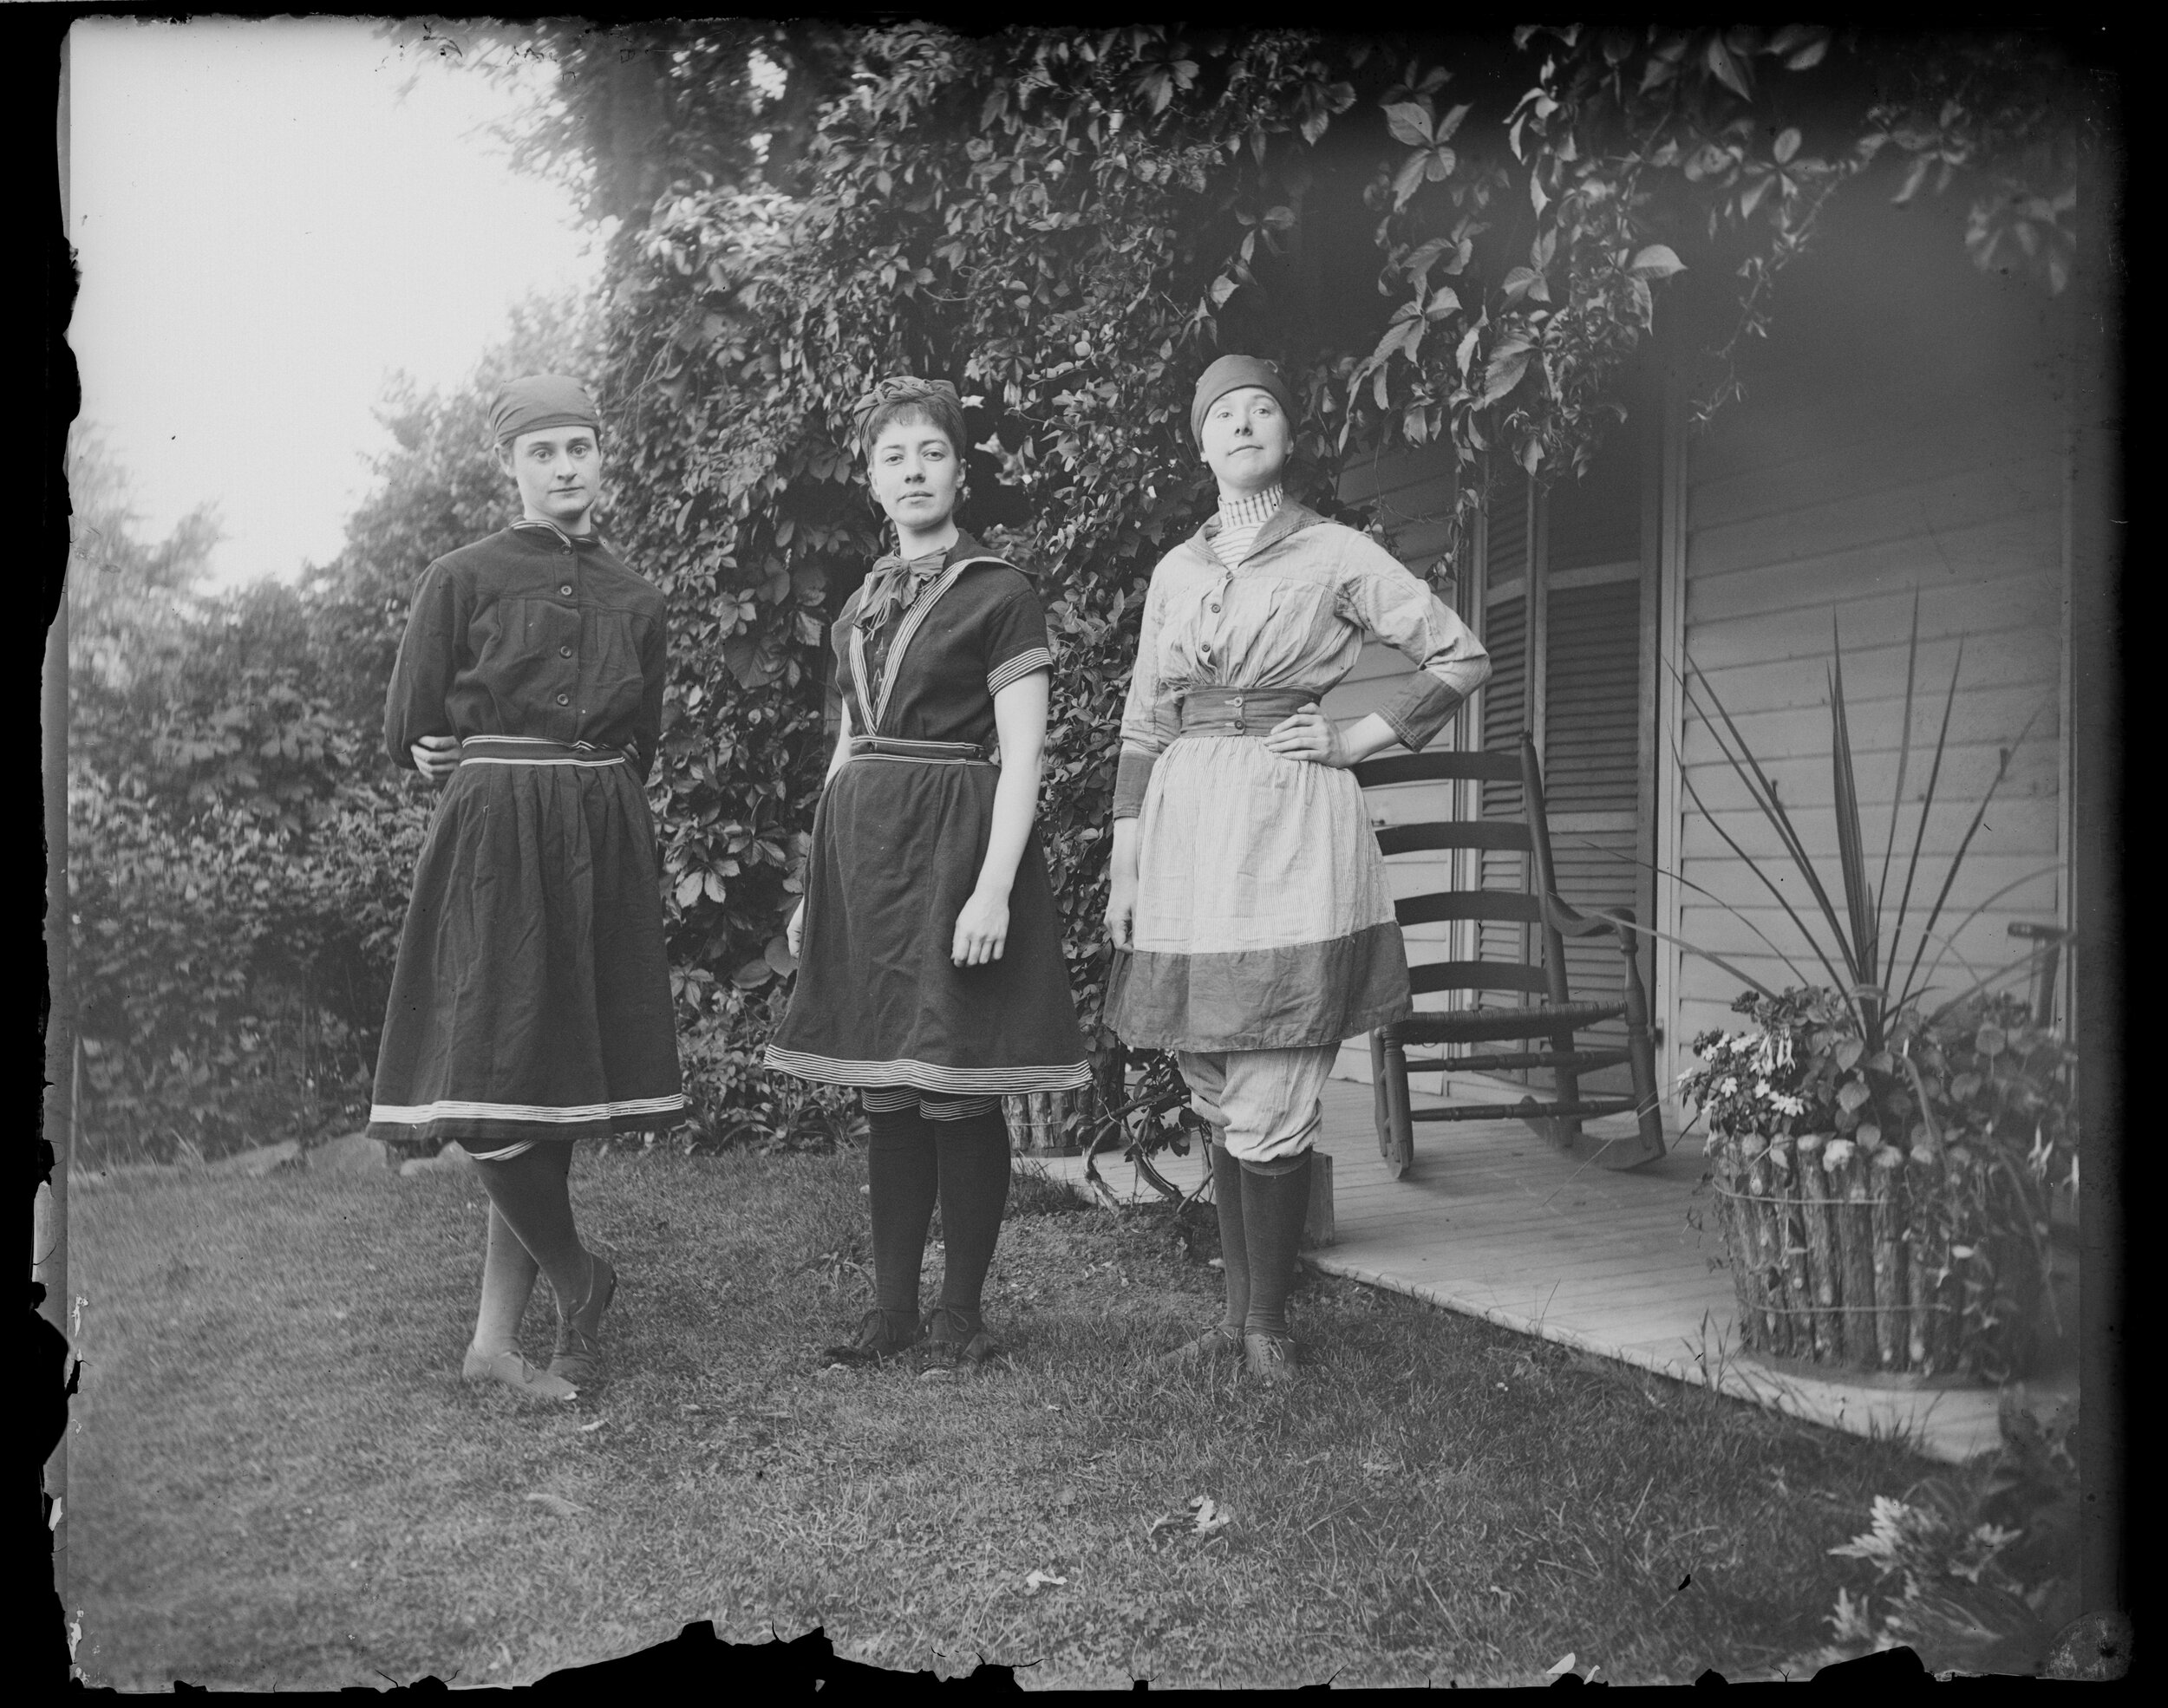  Alice Austen (center) with her friends Violet Ward (right) and Caroline Ward (left) at Clear Comfort, the Austen family home in Rosebank, Staten Island. Photo by Alice Austen, July 11, 1890. 